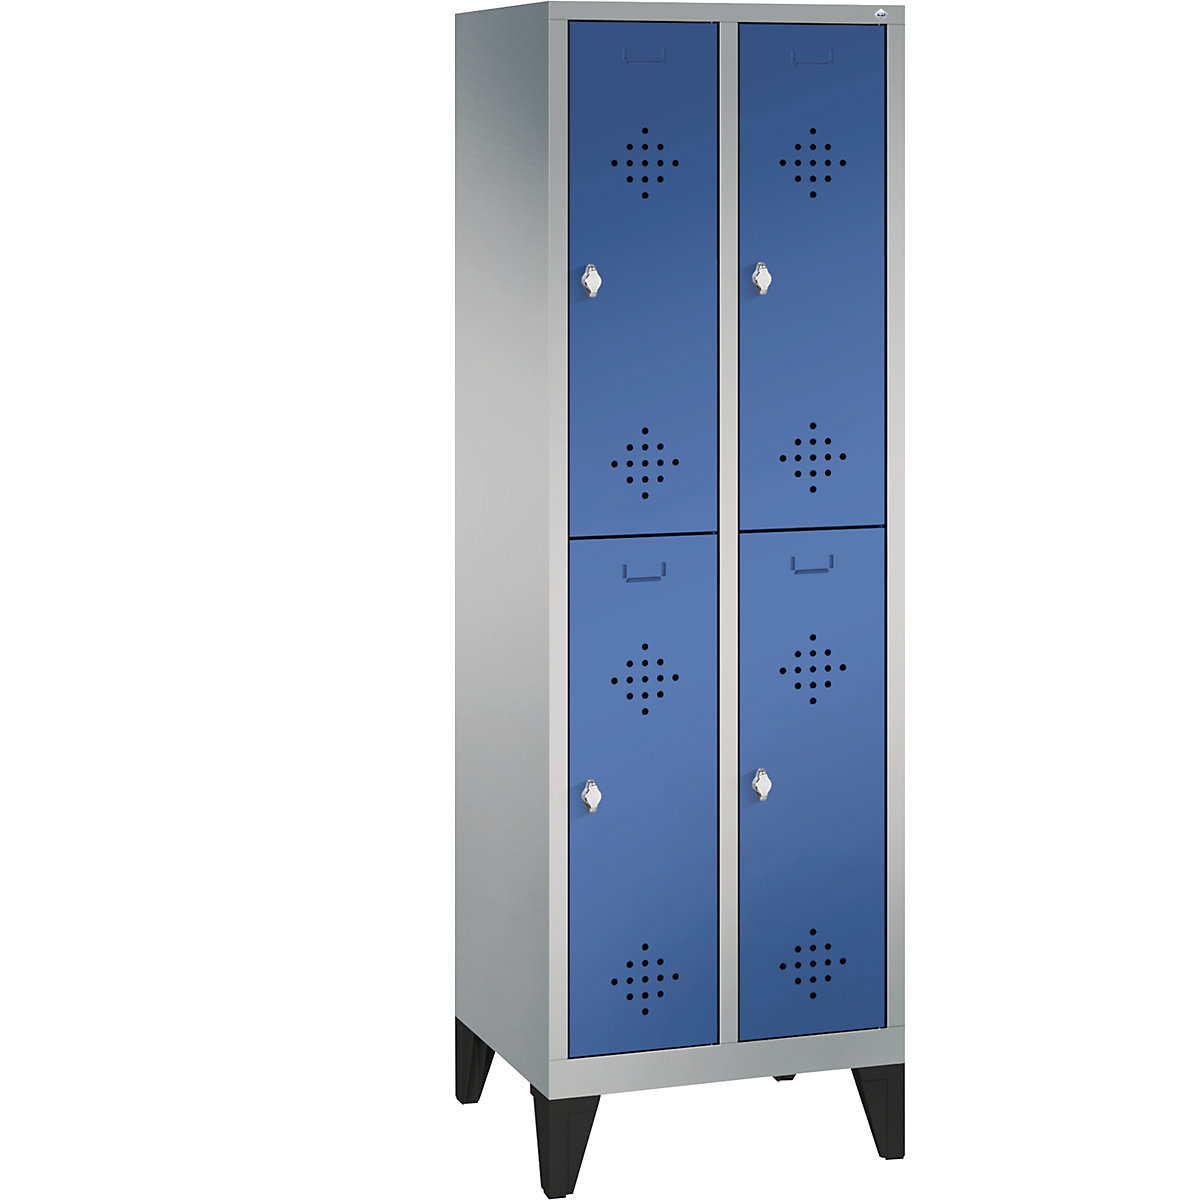 CLASSIC cloakroom locker with feet, double tier – C+P